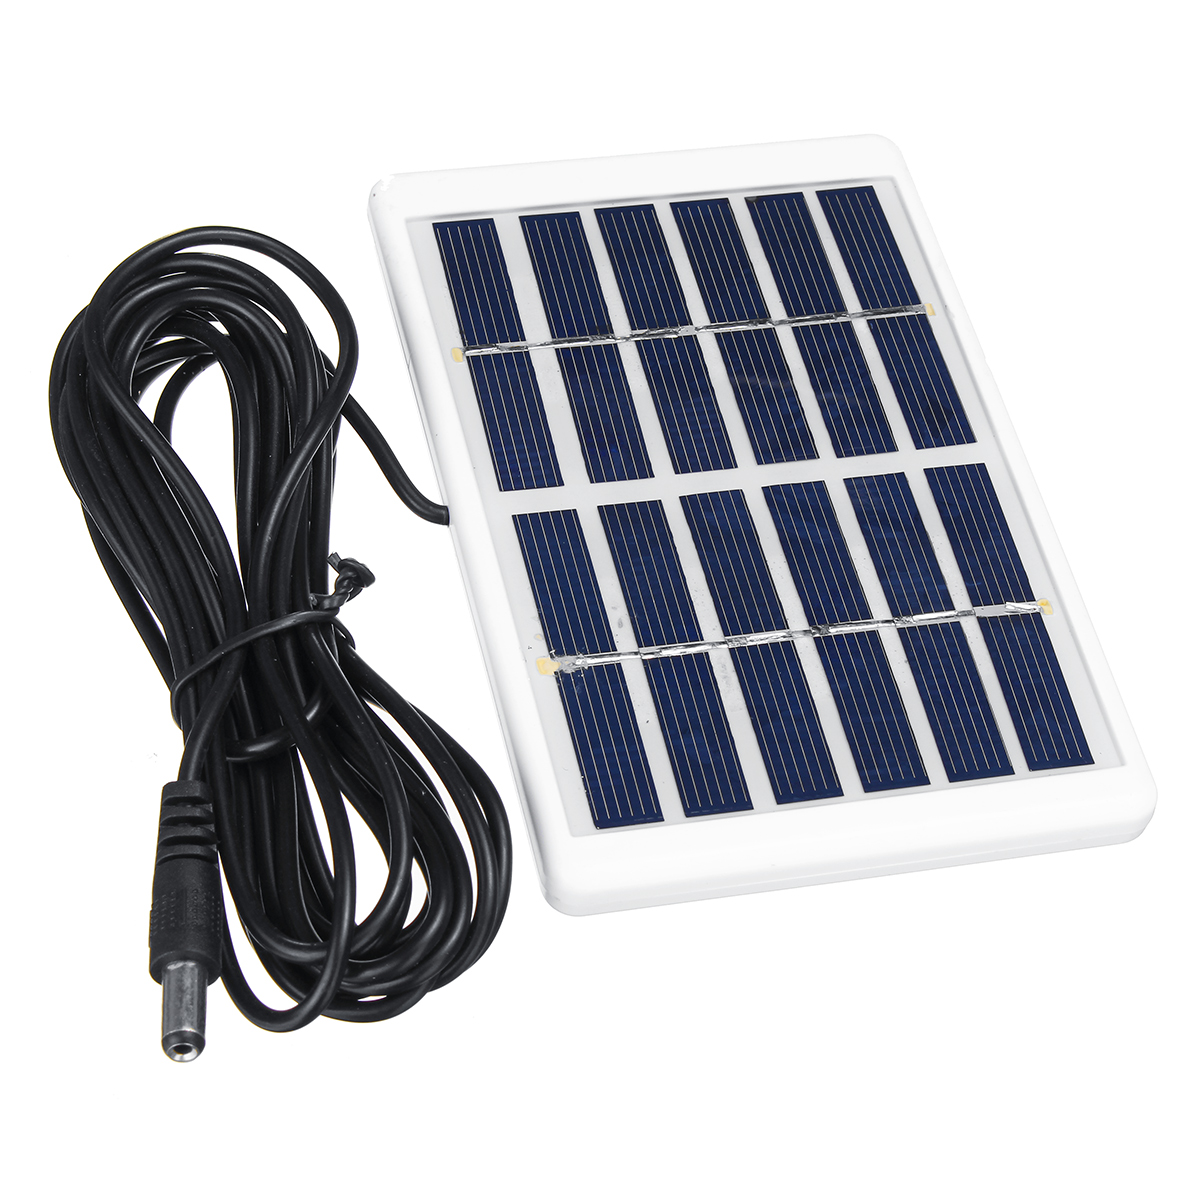 1.2W 6V Mini Portable Polycrystalline Solar Panel with Plastic Frame + 5521 DC Interface Cable